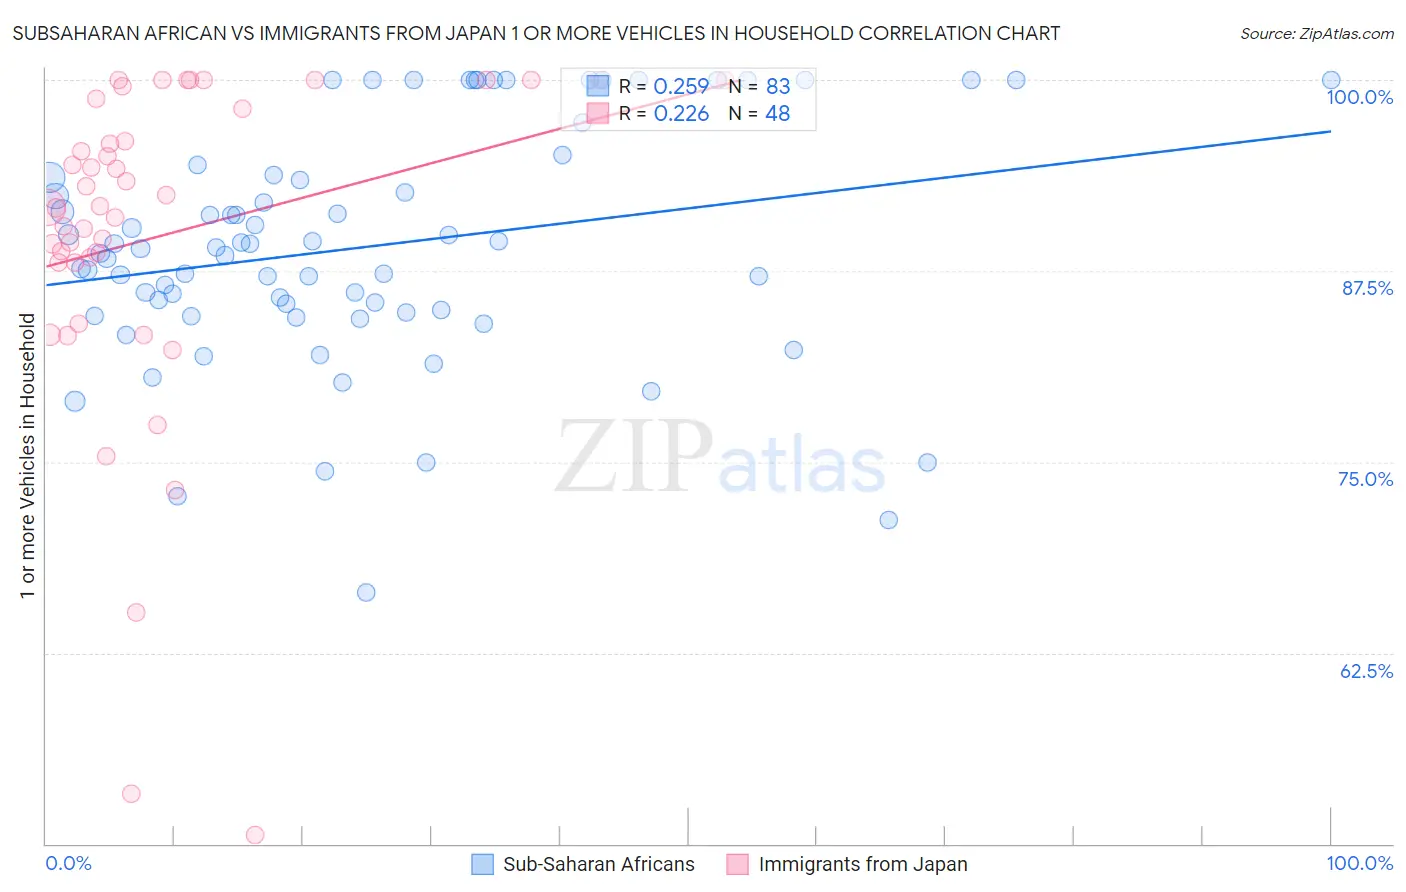 Subsaharan African vs Immigrants from Japan 1 or more Vehicles in Household